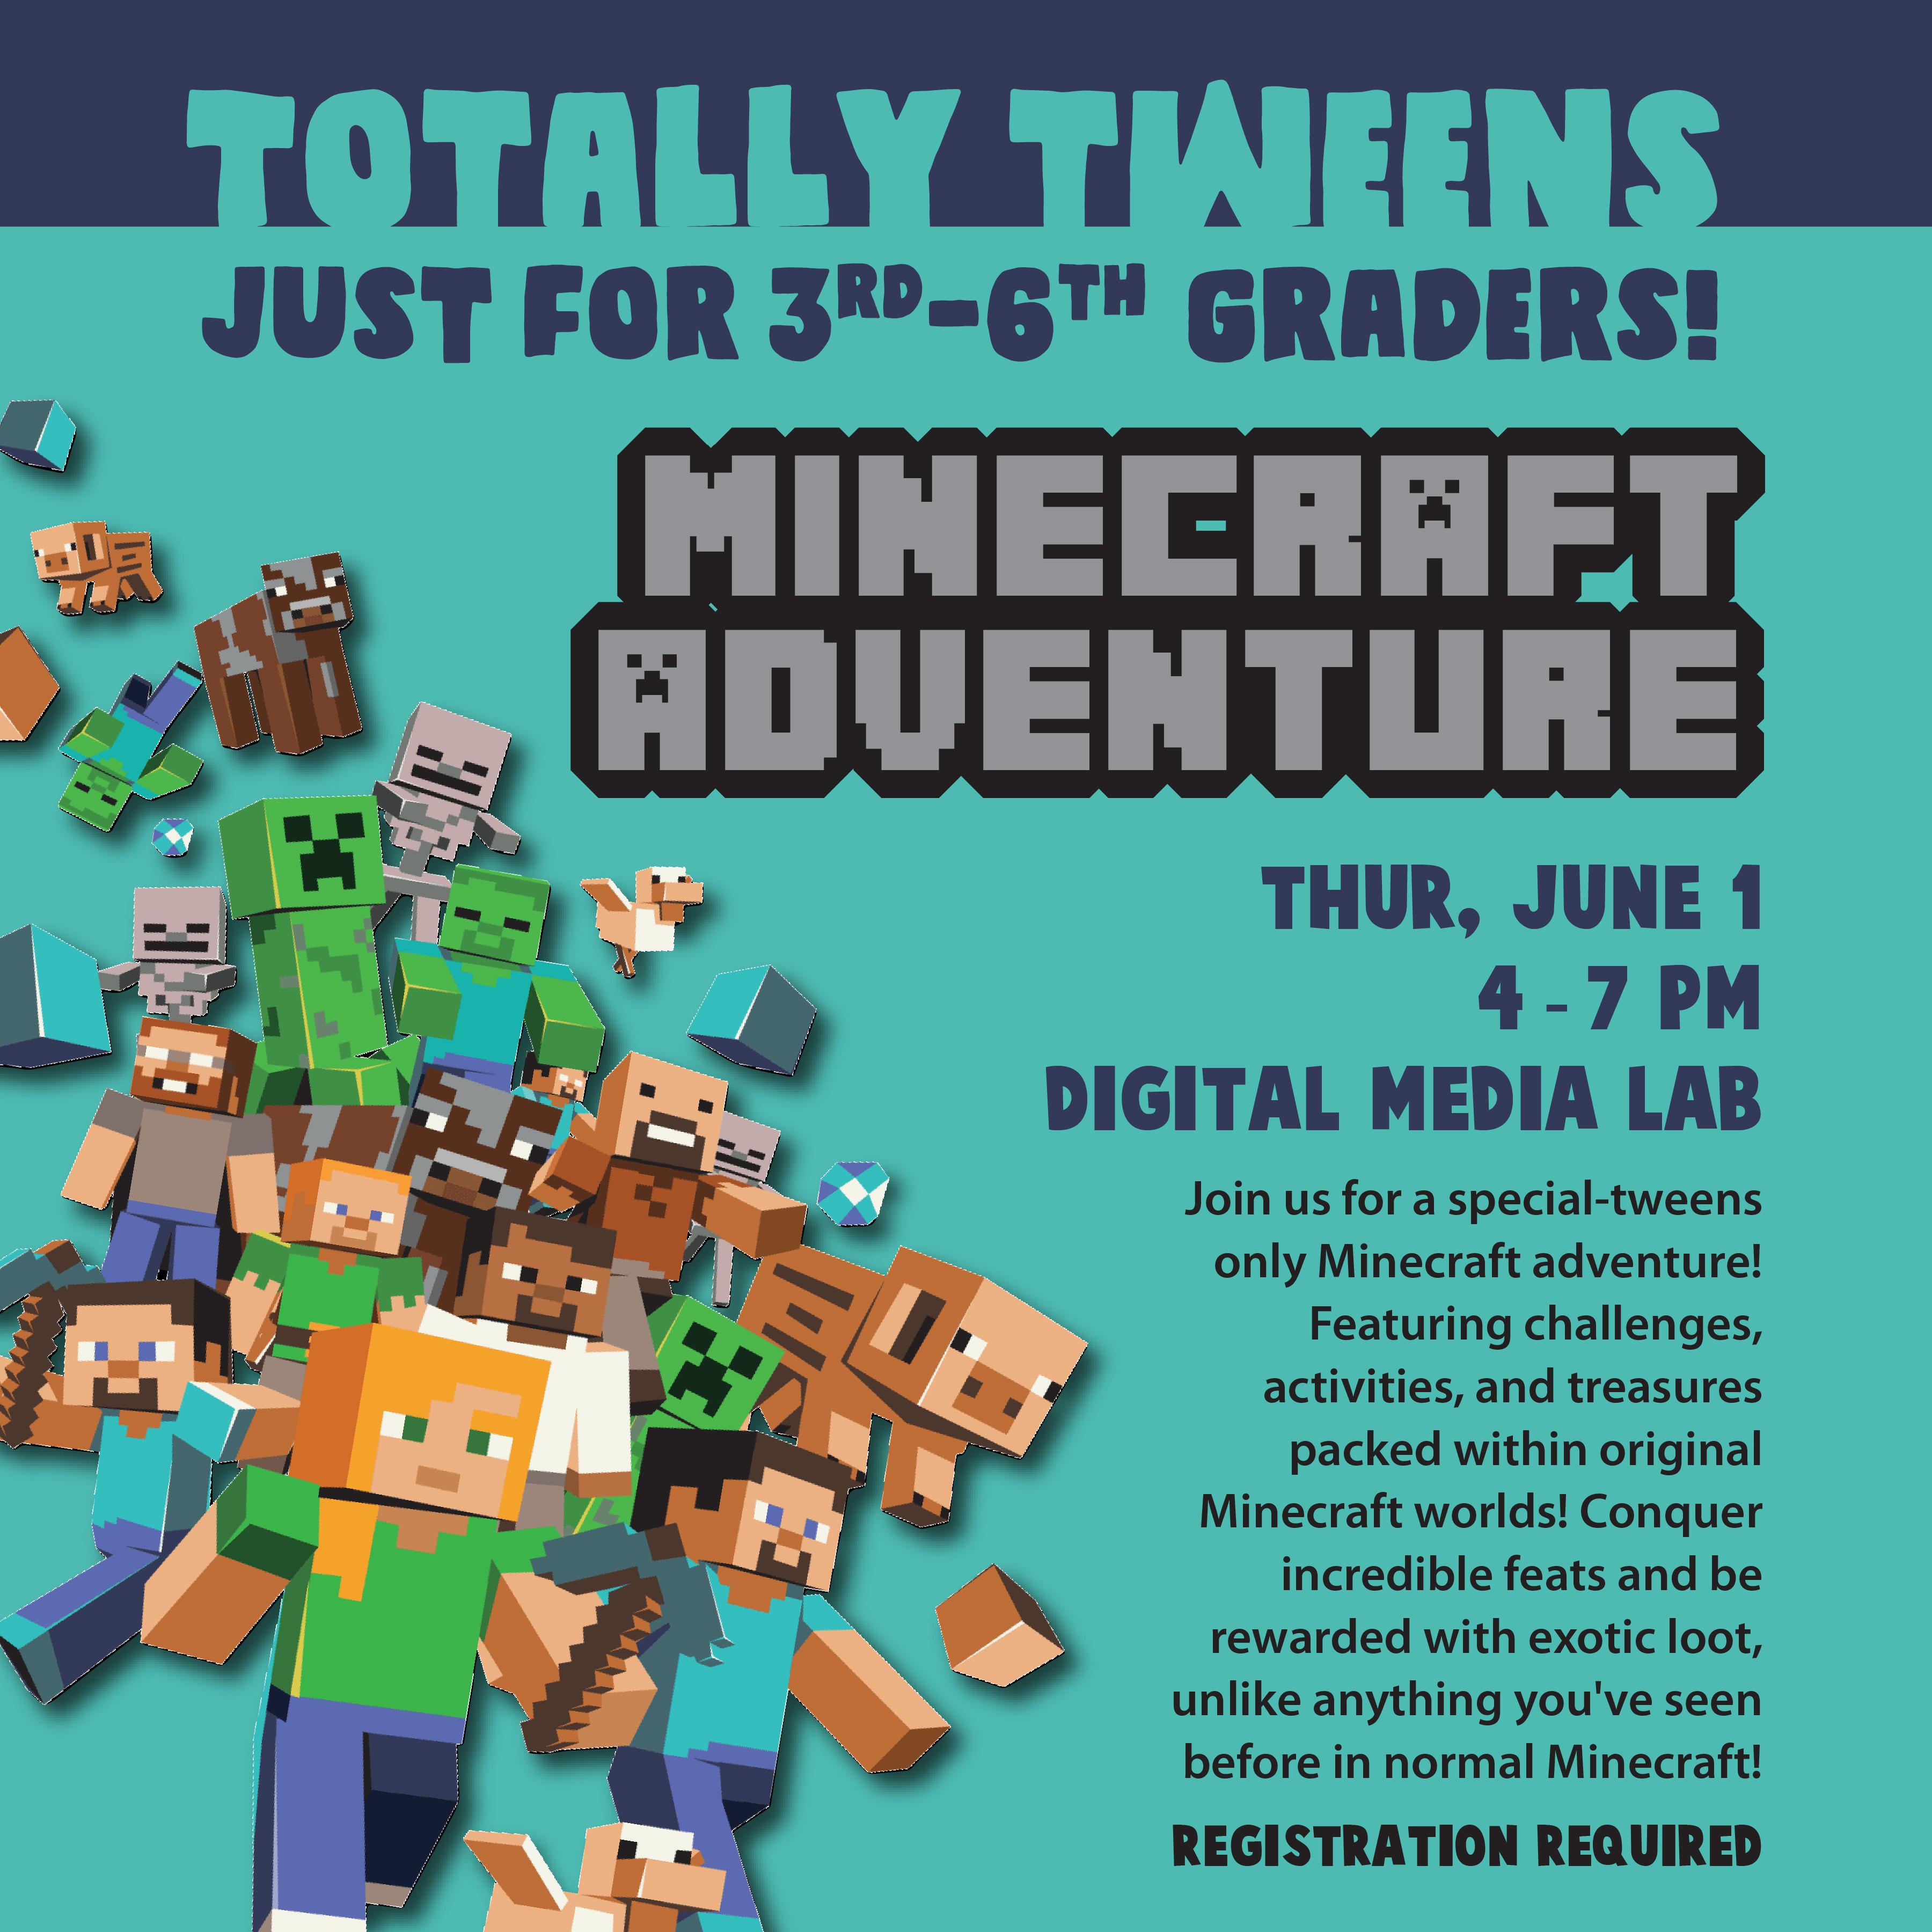 Totally Tweens Event for 3rd-6th Graders: Minecraft Adventure with Minecraft characters and event details